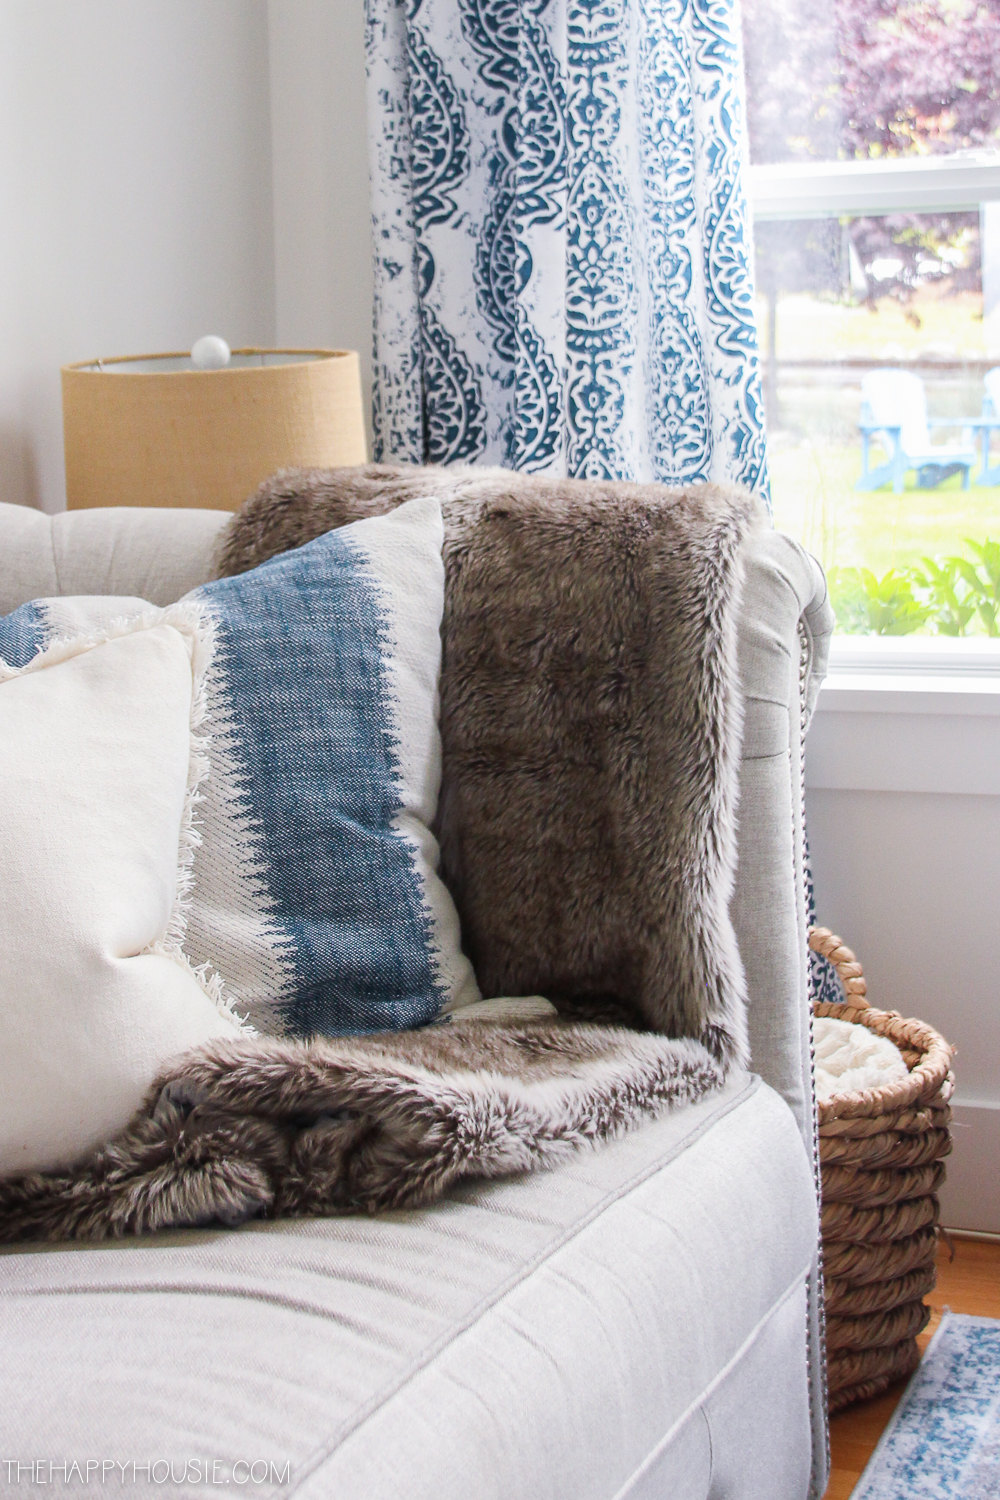 Blue and white pillows on the couch beside the faux fur throw.